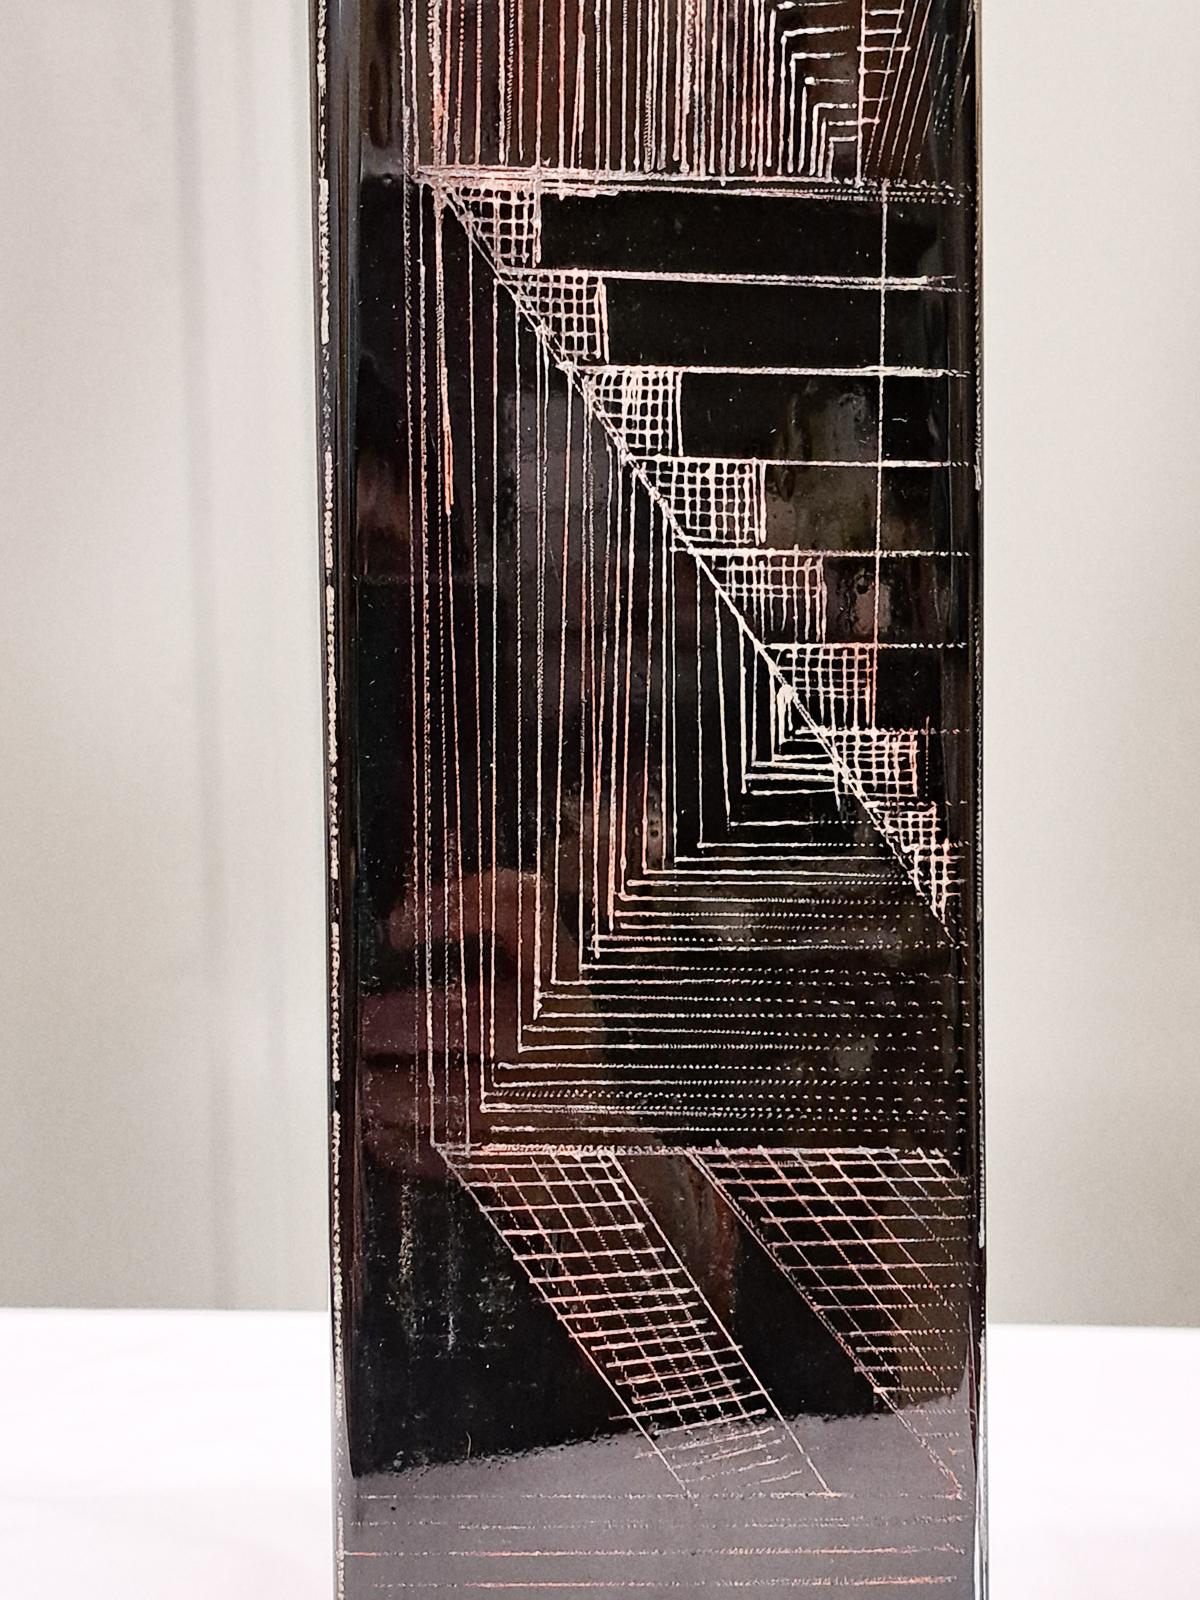 Anatole Riecke, black vase, engraved glass signed and dated,  20th century. This series depicts the landscape rise of N.Y. 

A stunning art piece, all one-off, distinctive vases, fashioned with period cubism etched designs. Signed and dated.

This